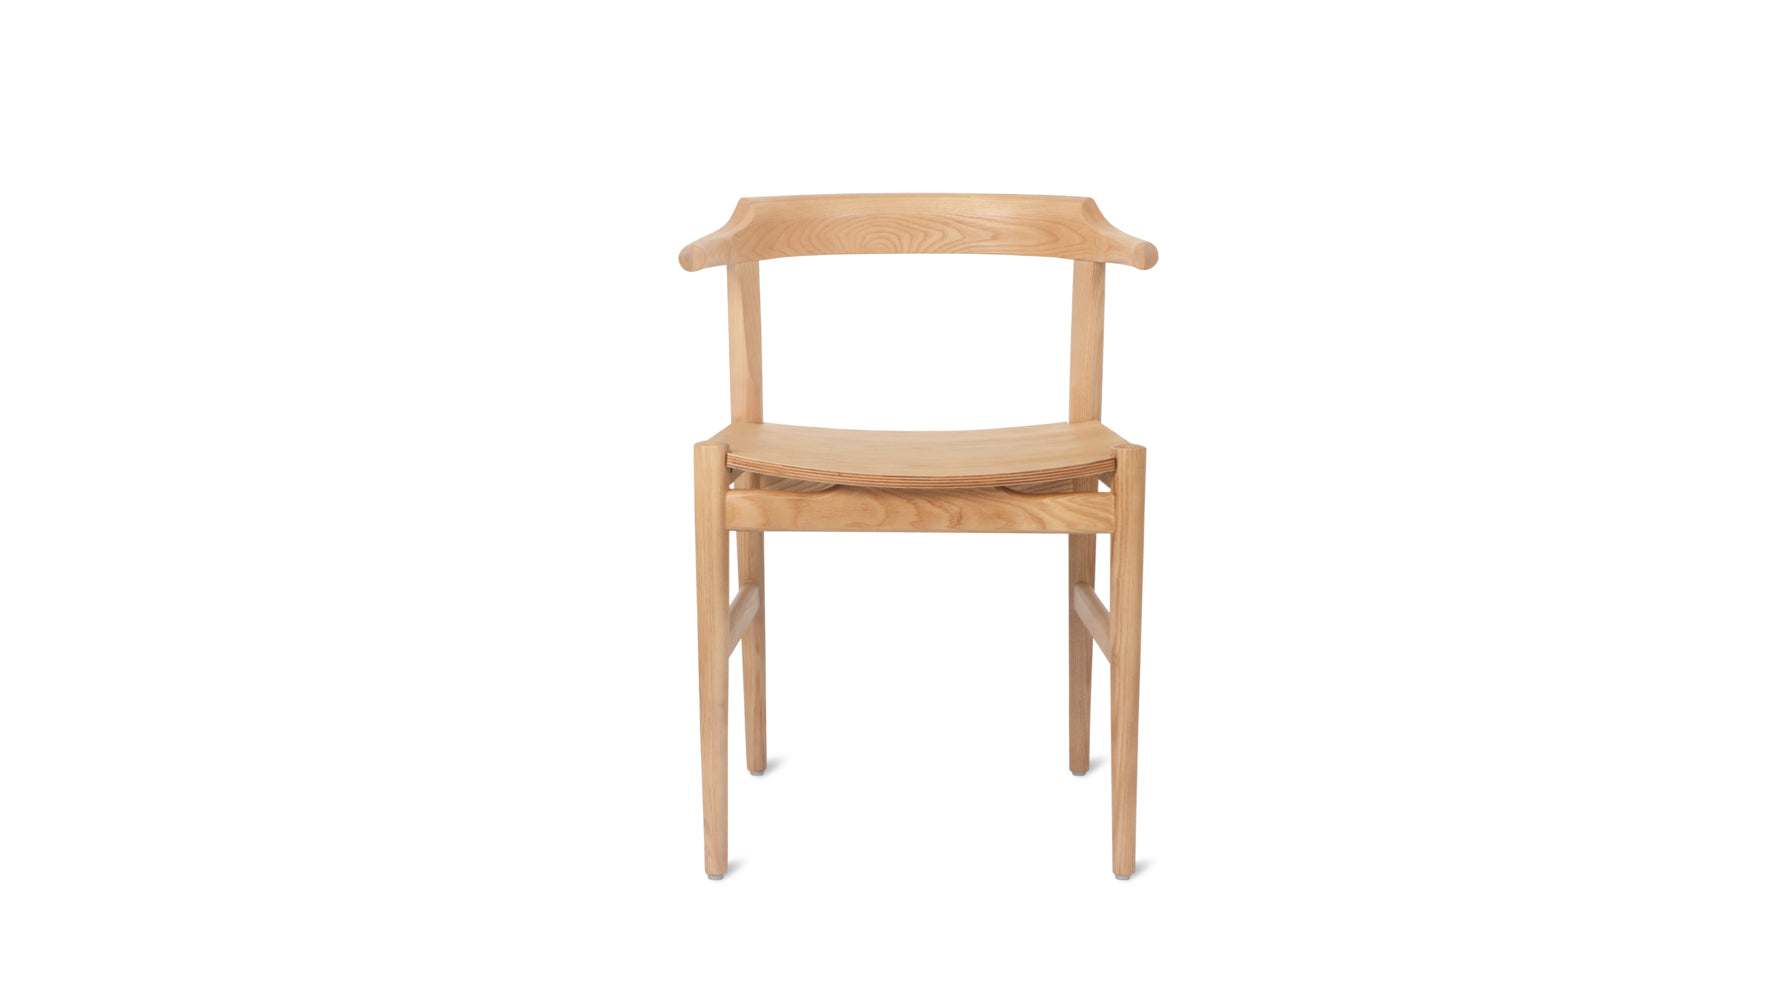 Tuck In Dining Chair, White Oak, Wood Seat - Image 1